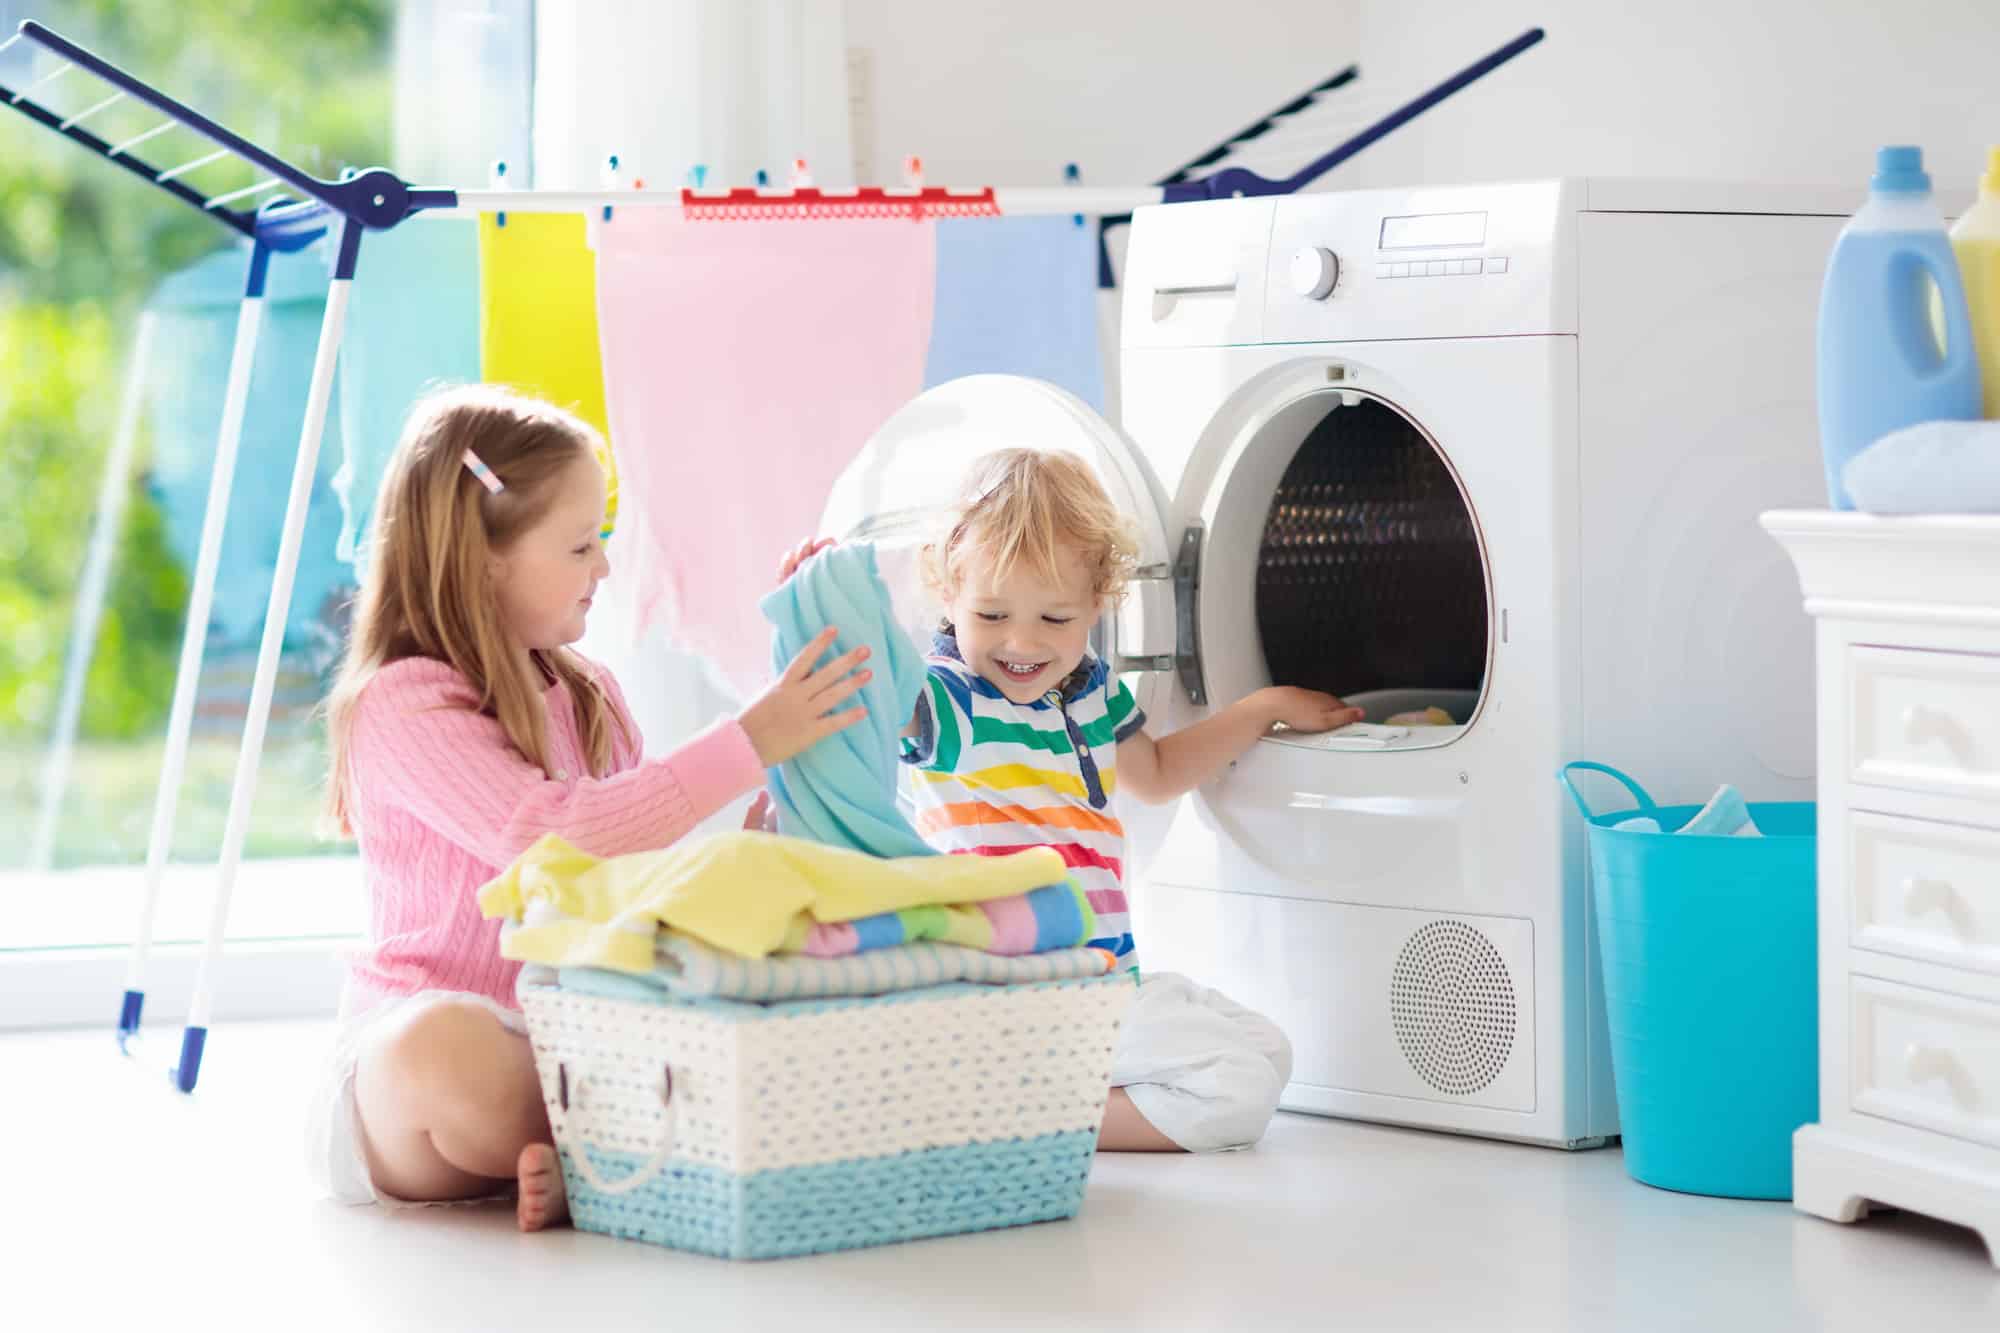 Kids in laundry room with washing machine